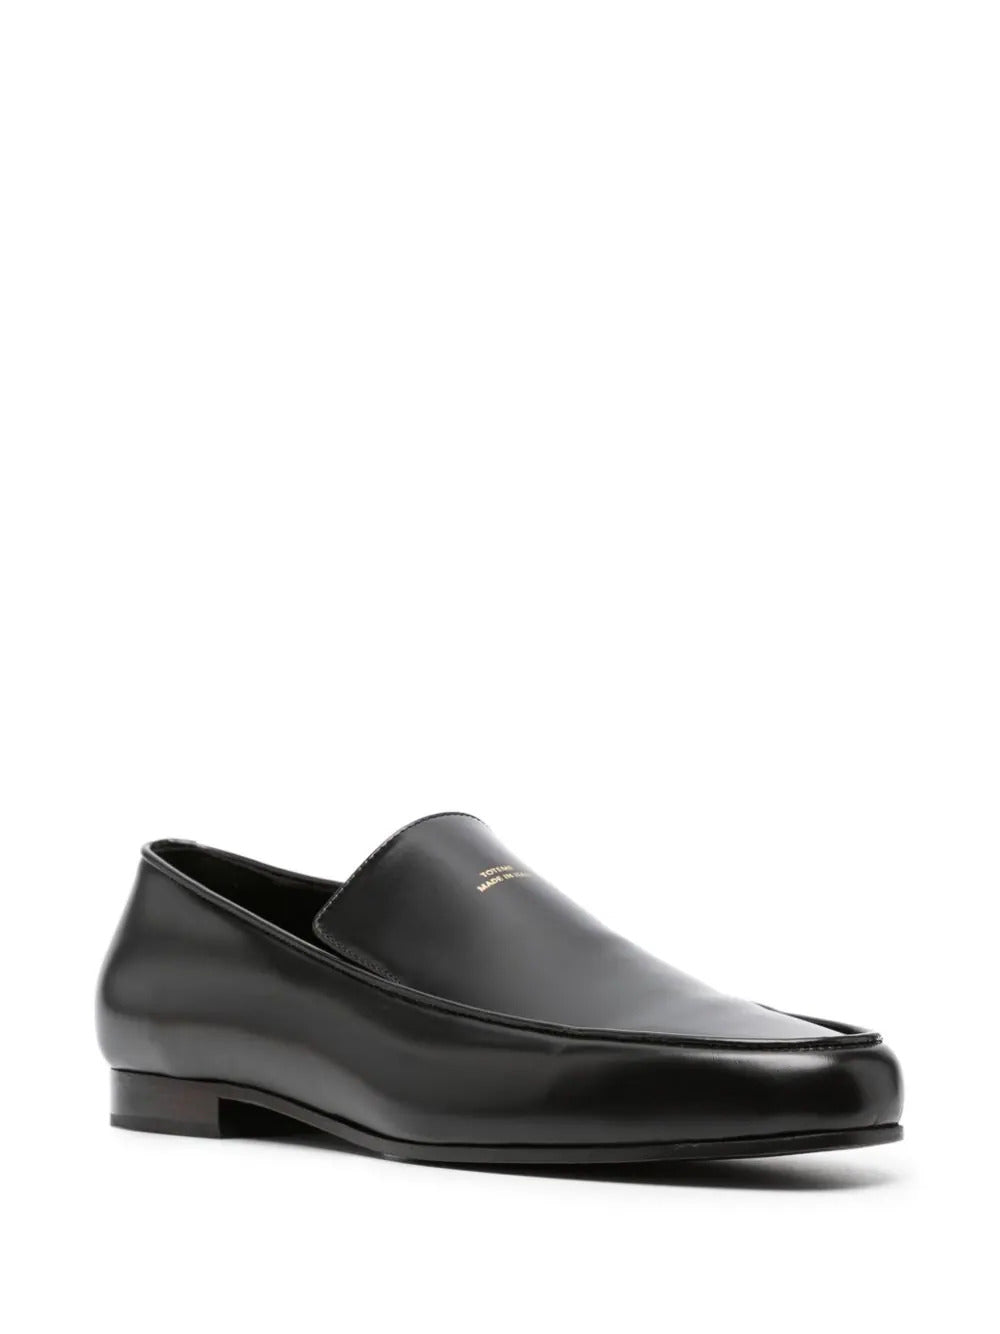 The Oval Loafer